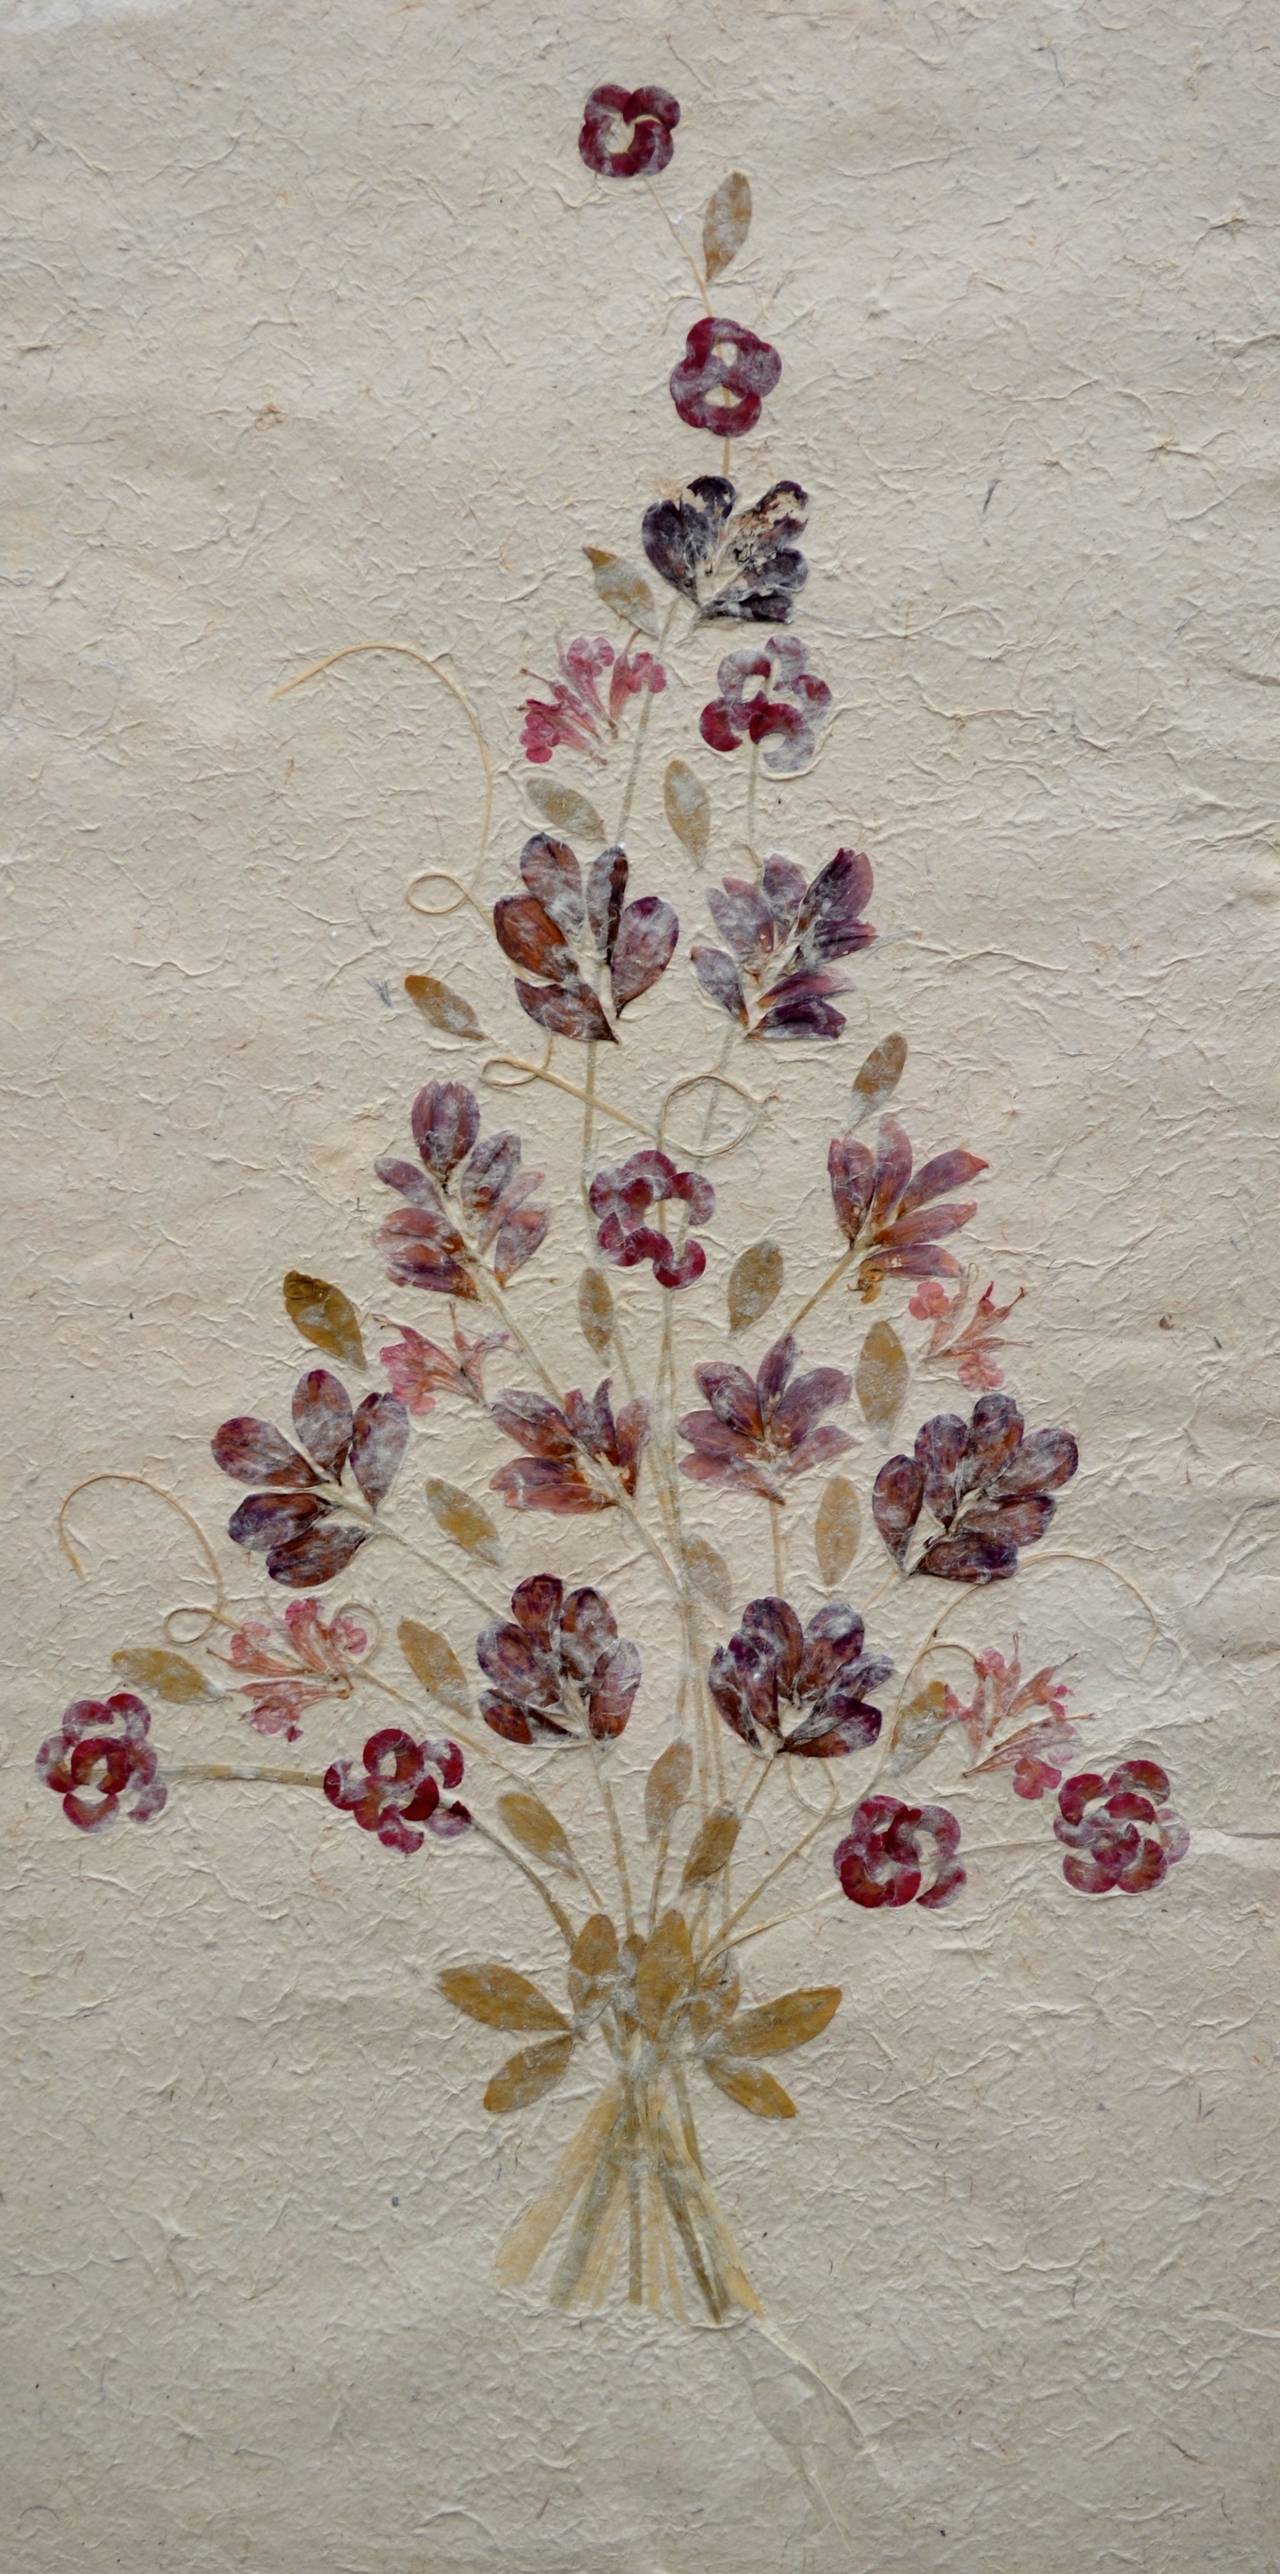 Madagascan Dried Flowers - Art by Unknown